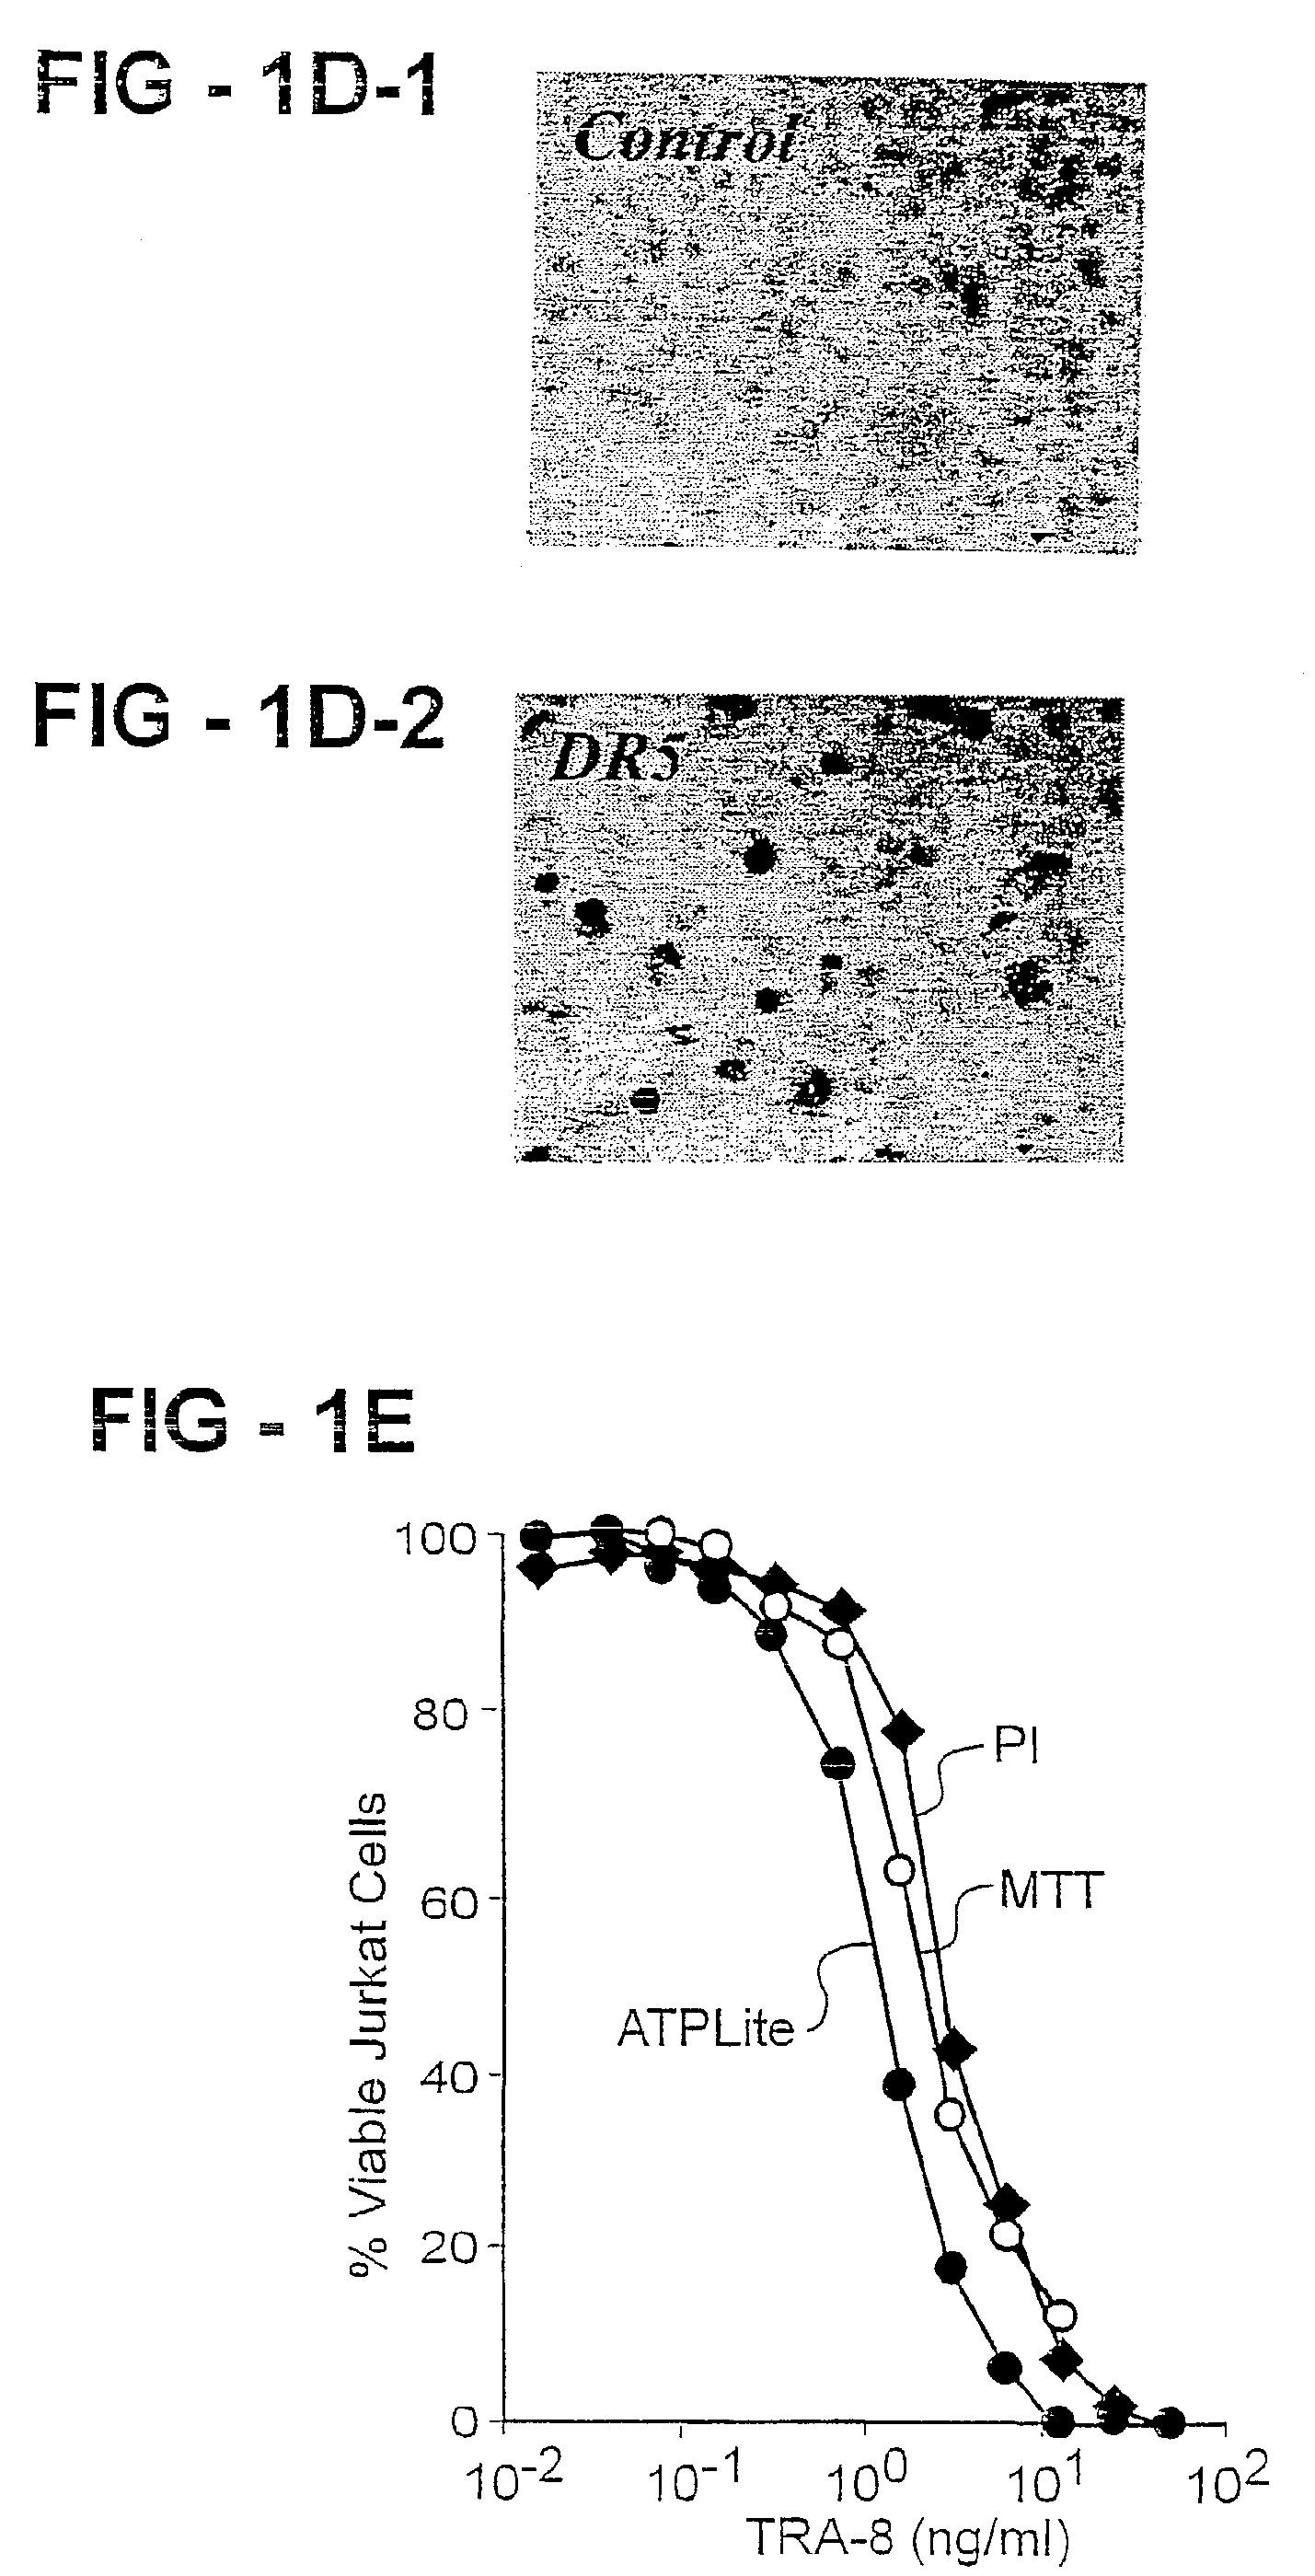 Antibody selective for a tumor necrosis factor-related apoptosis-inducing ligand receptor and uses thereof